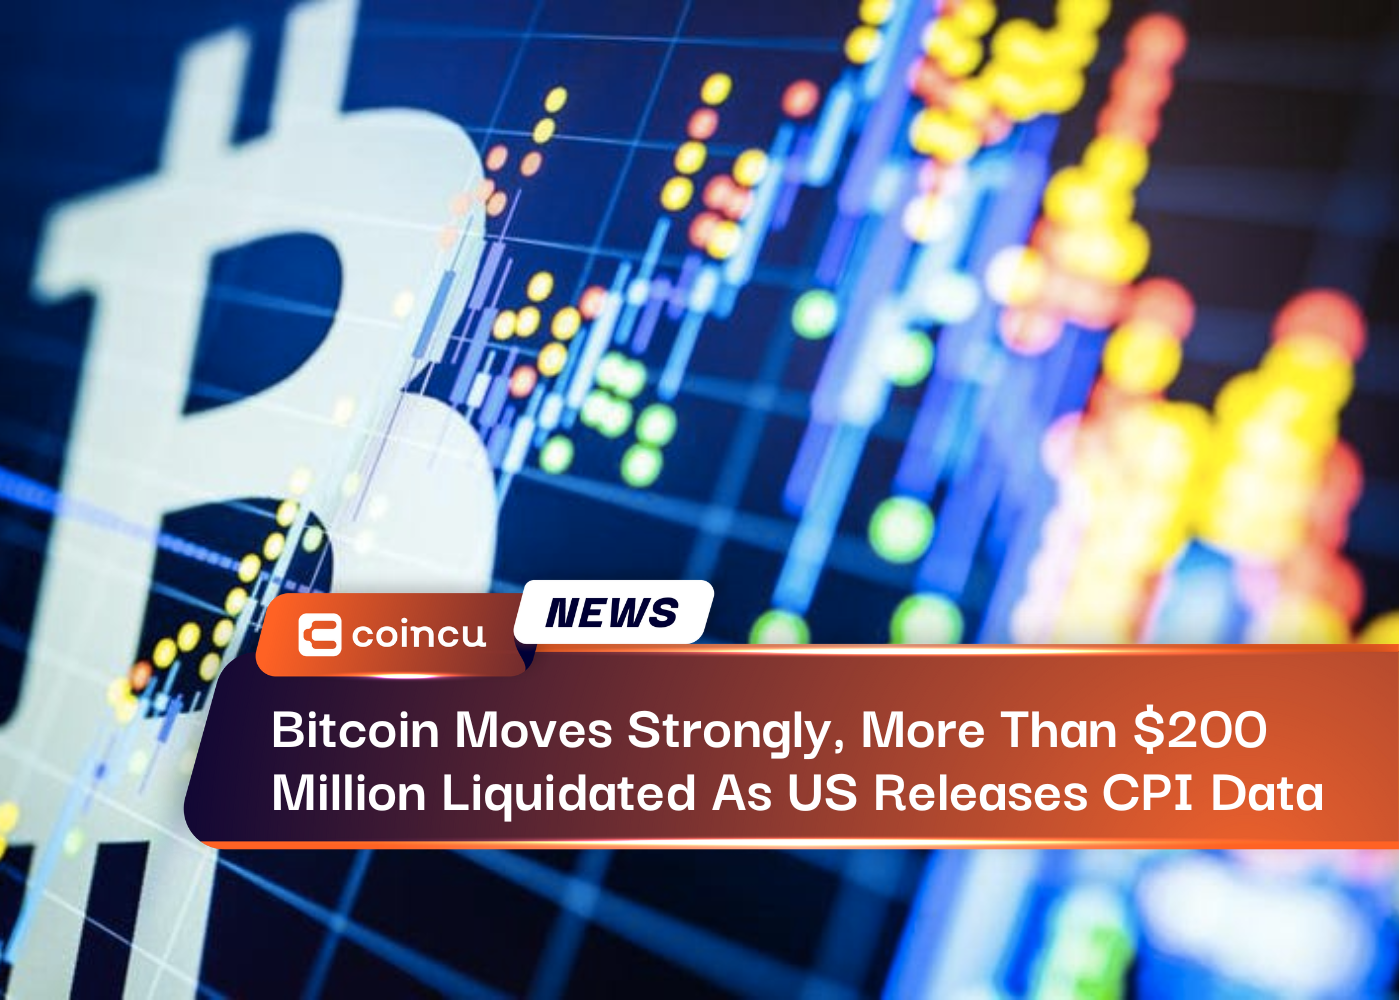 Bitcoin Moves Strongly, More Than $200 Million Liquidated As US Releases CPI Data